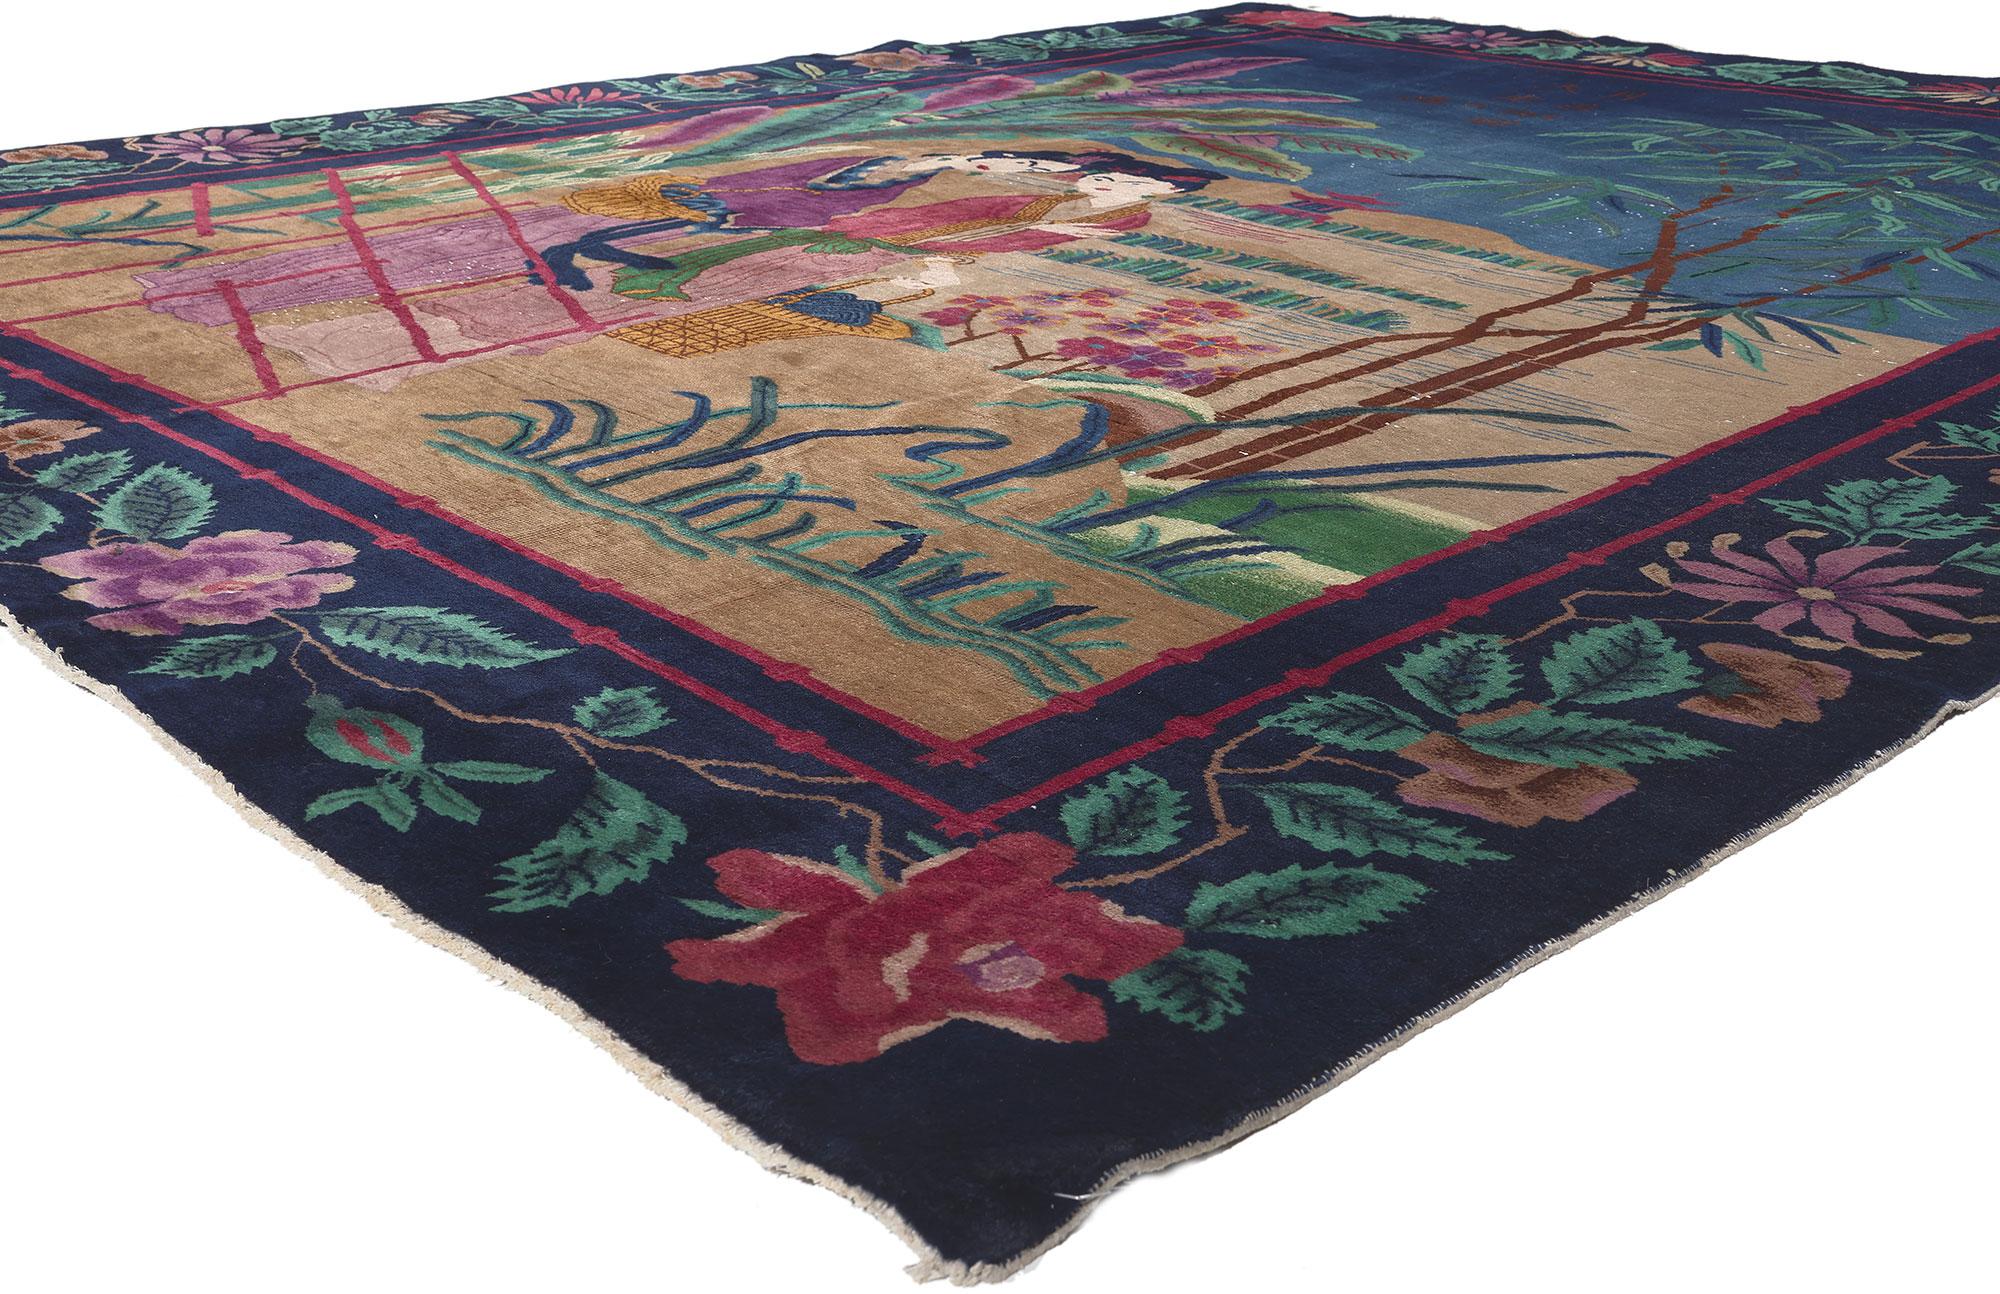 78614 Antique Chinese Art Deco Rug, 08'10 x 11'06. 
Emulating maximalist style with opulent detail work and lavish texture, this antique Chinese Art Deco rug is a captivating vision of woven beauty. The Chinese folklore and vibrant colorway woven